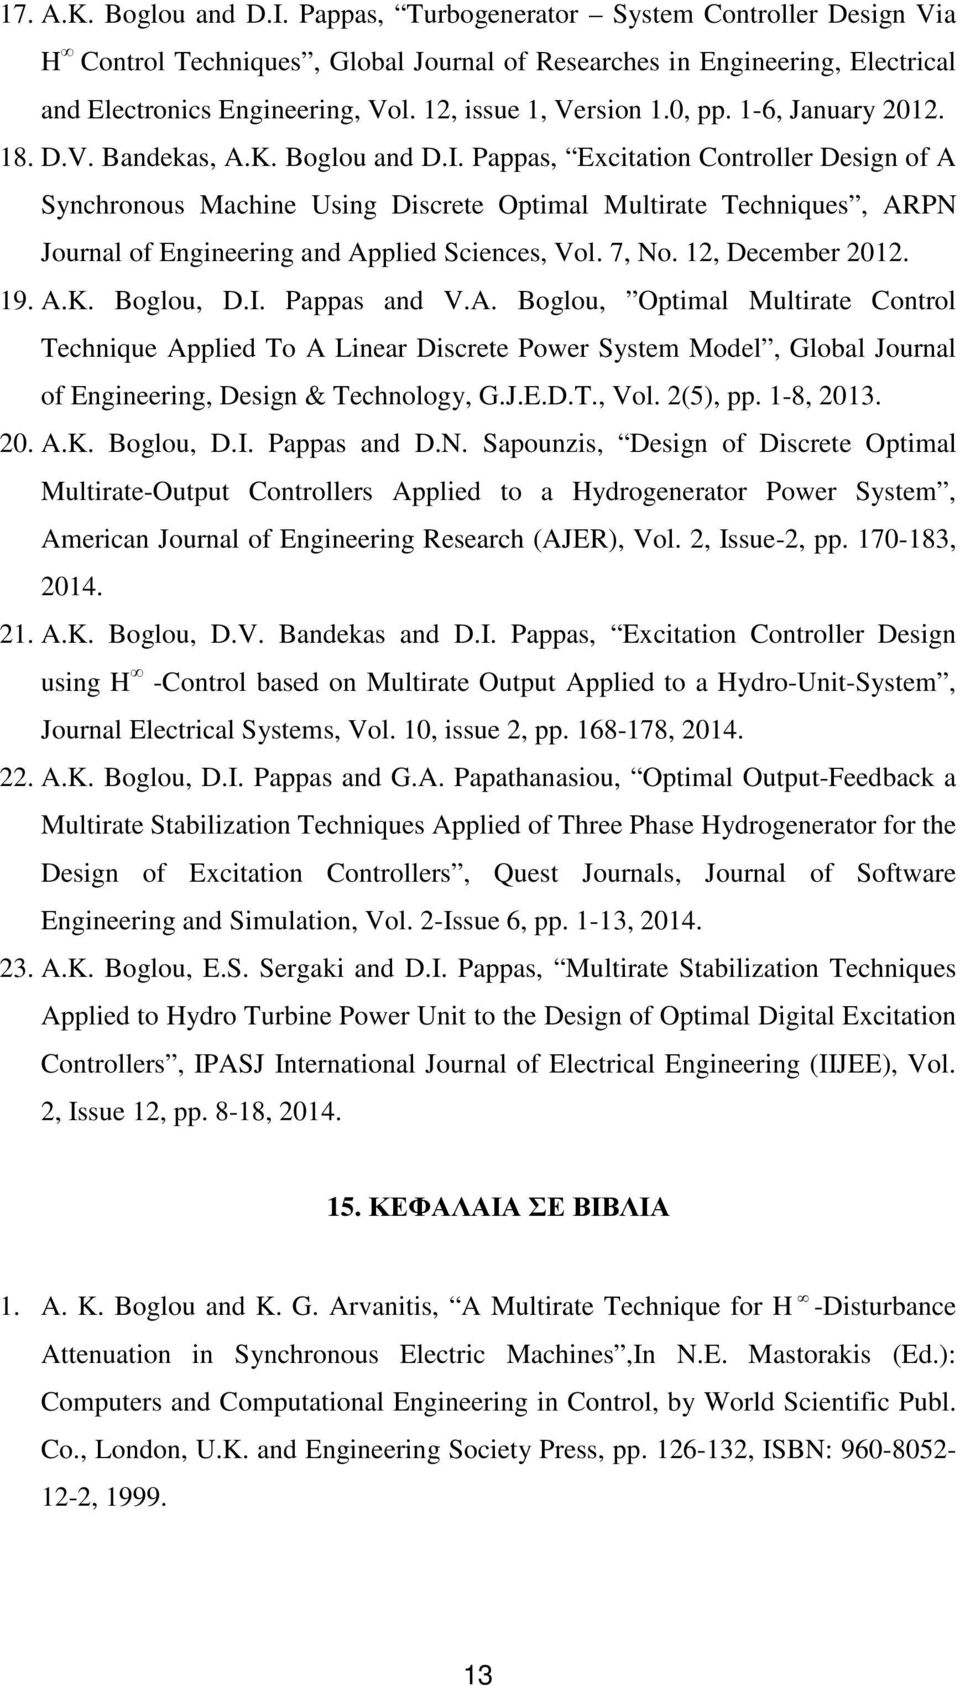 Pappas, Excitation Controller Design of A Synchronous Machine Using Discrete Optimal Multirate Techniques, ARPN Journal of Engineering and Applied Sciences, Vol. 7, No. 12, December 2012. 19. A.K.